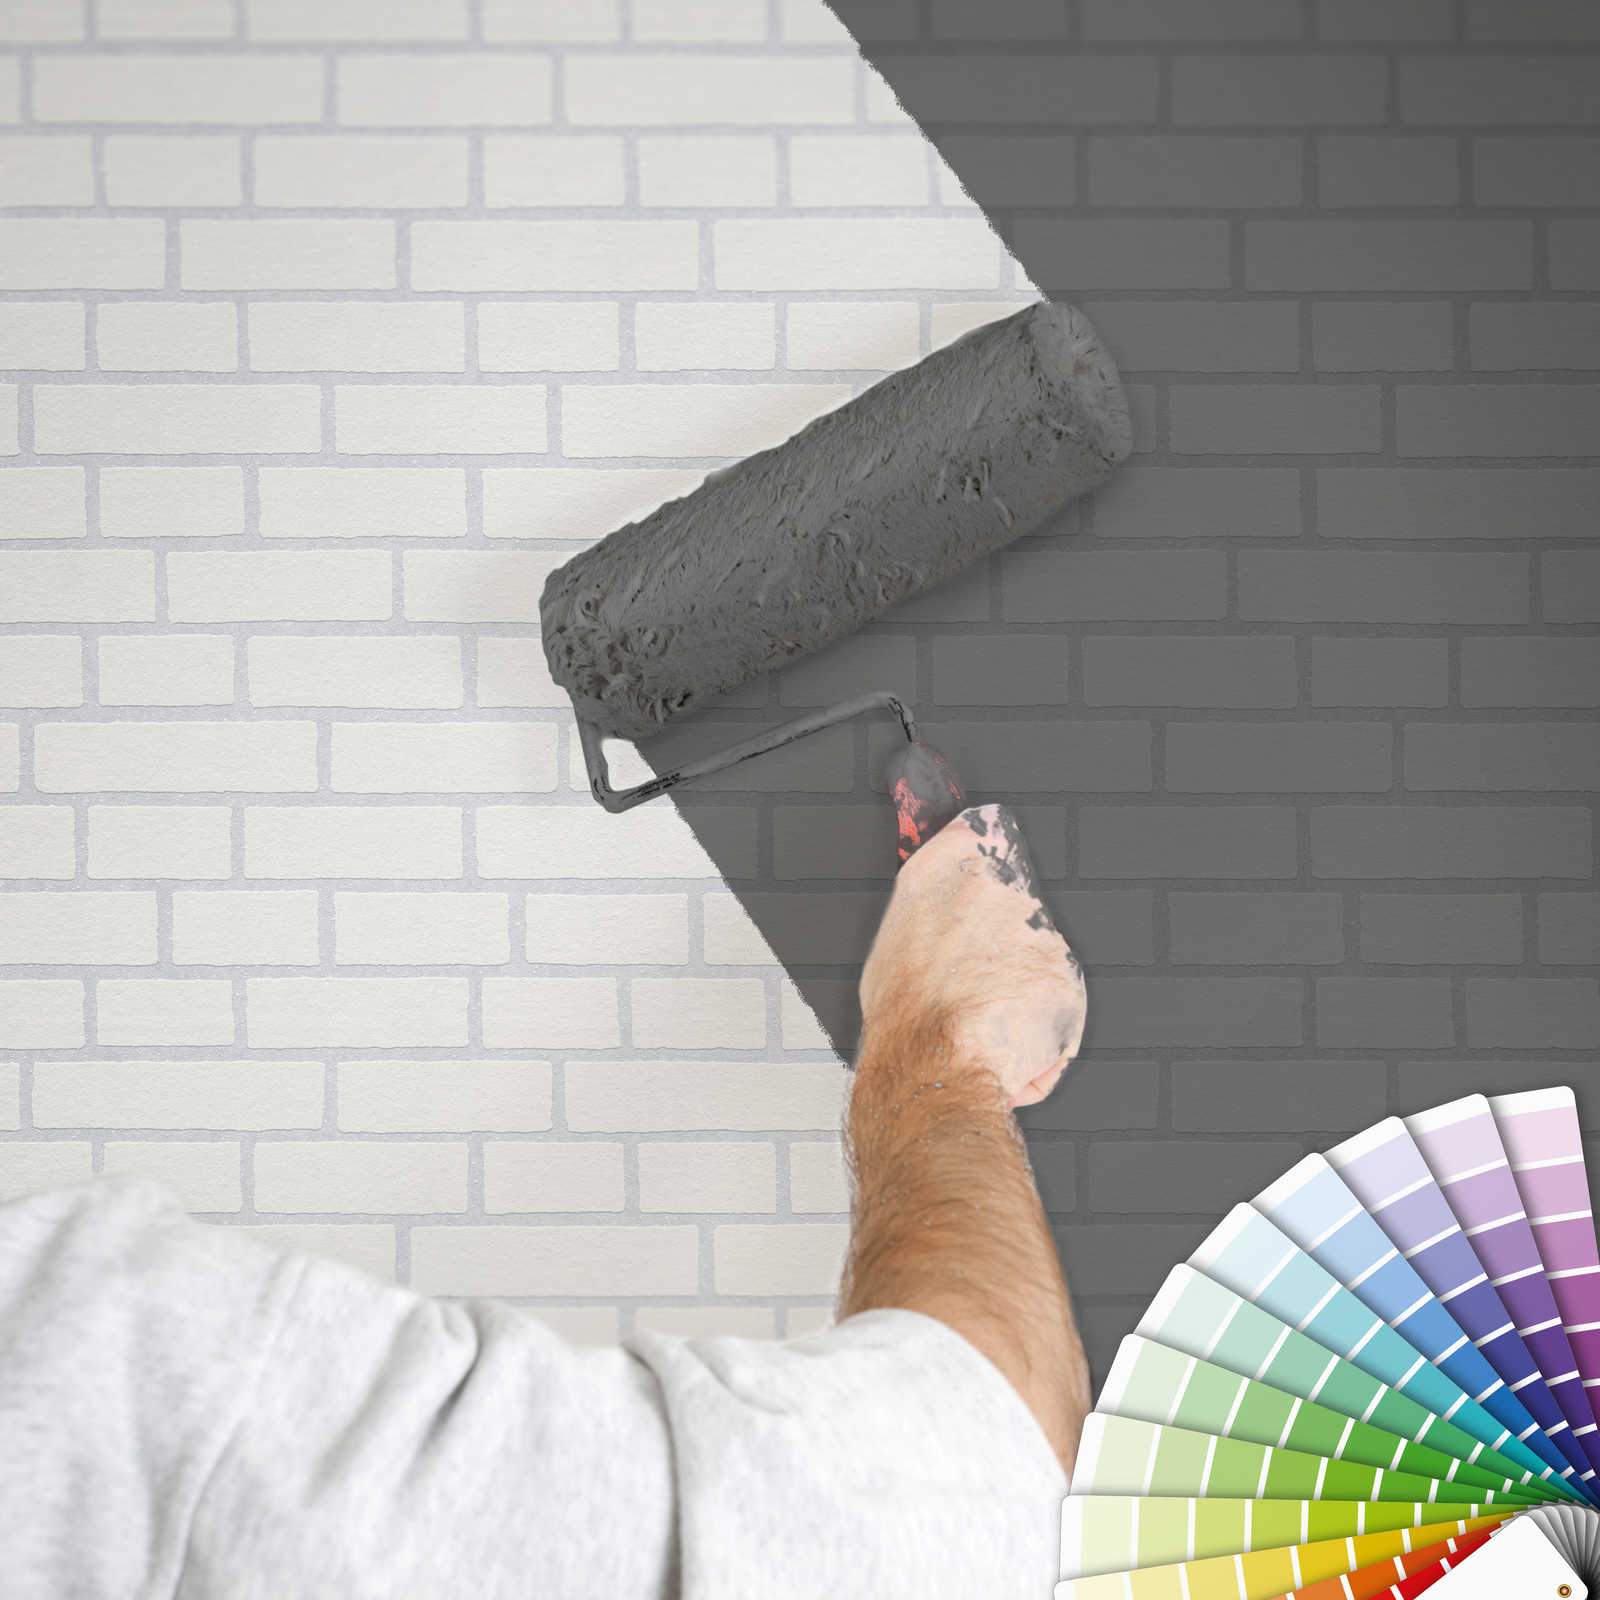             Masonry wallpaper to paint over, with 3D effect - Paintable, White
        